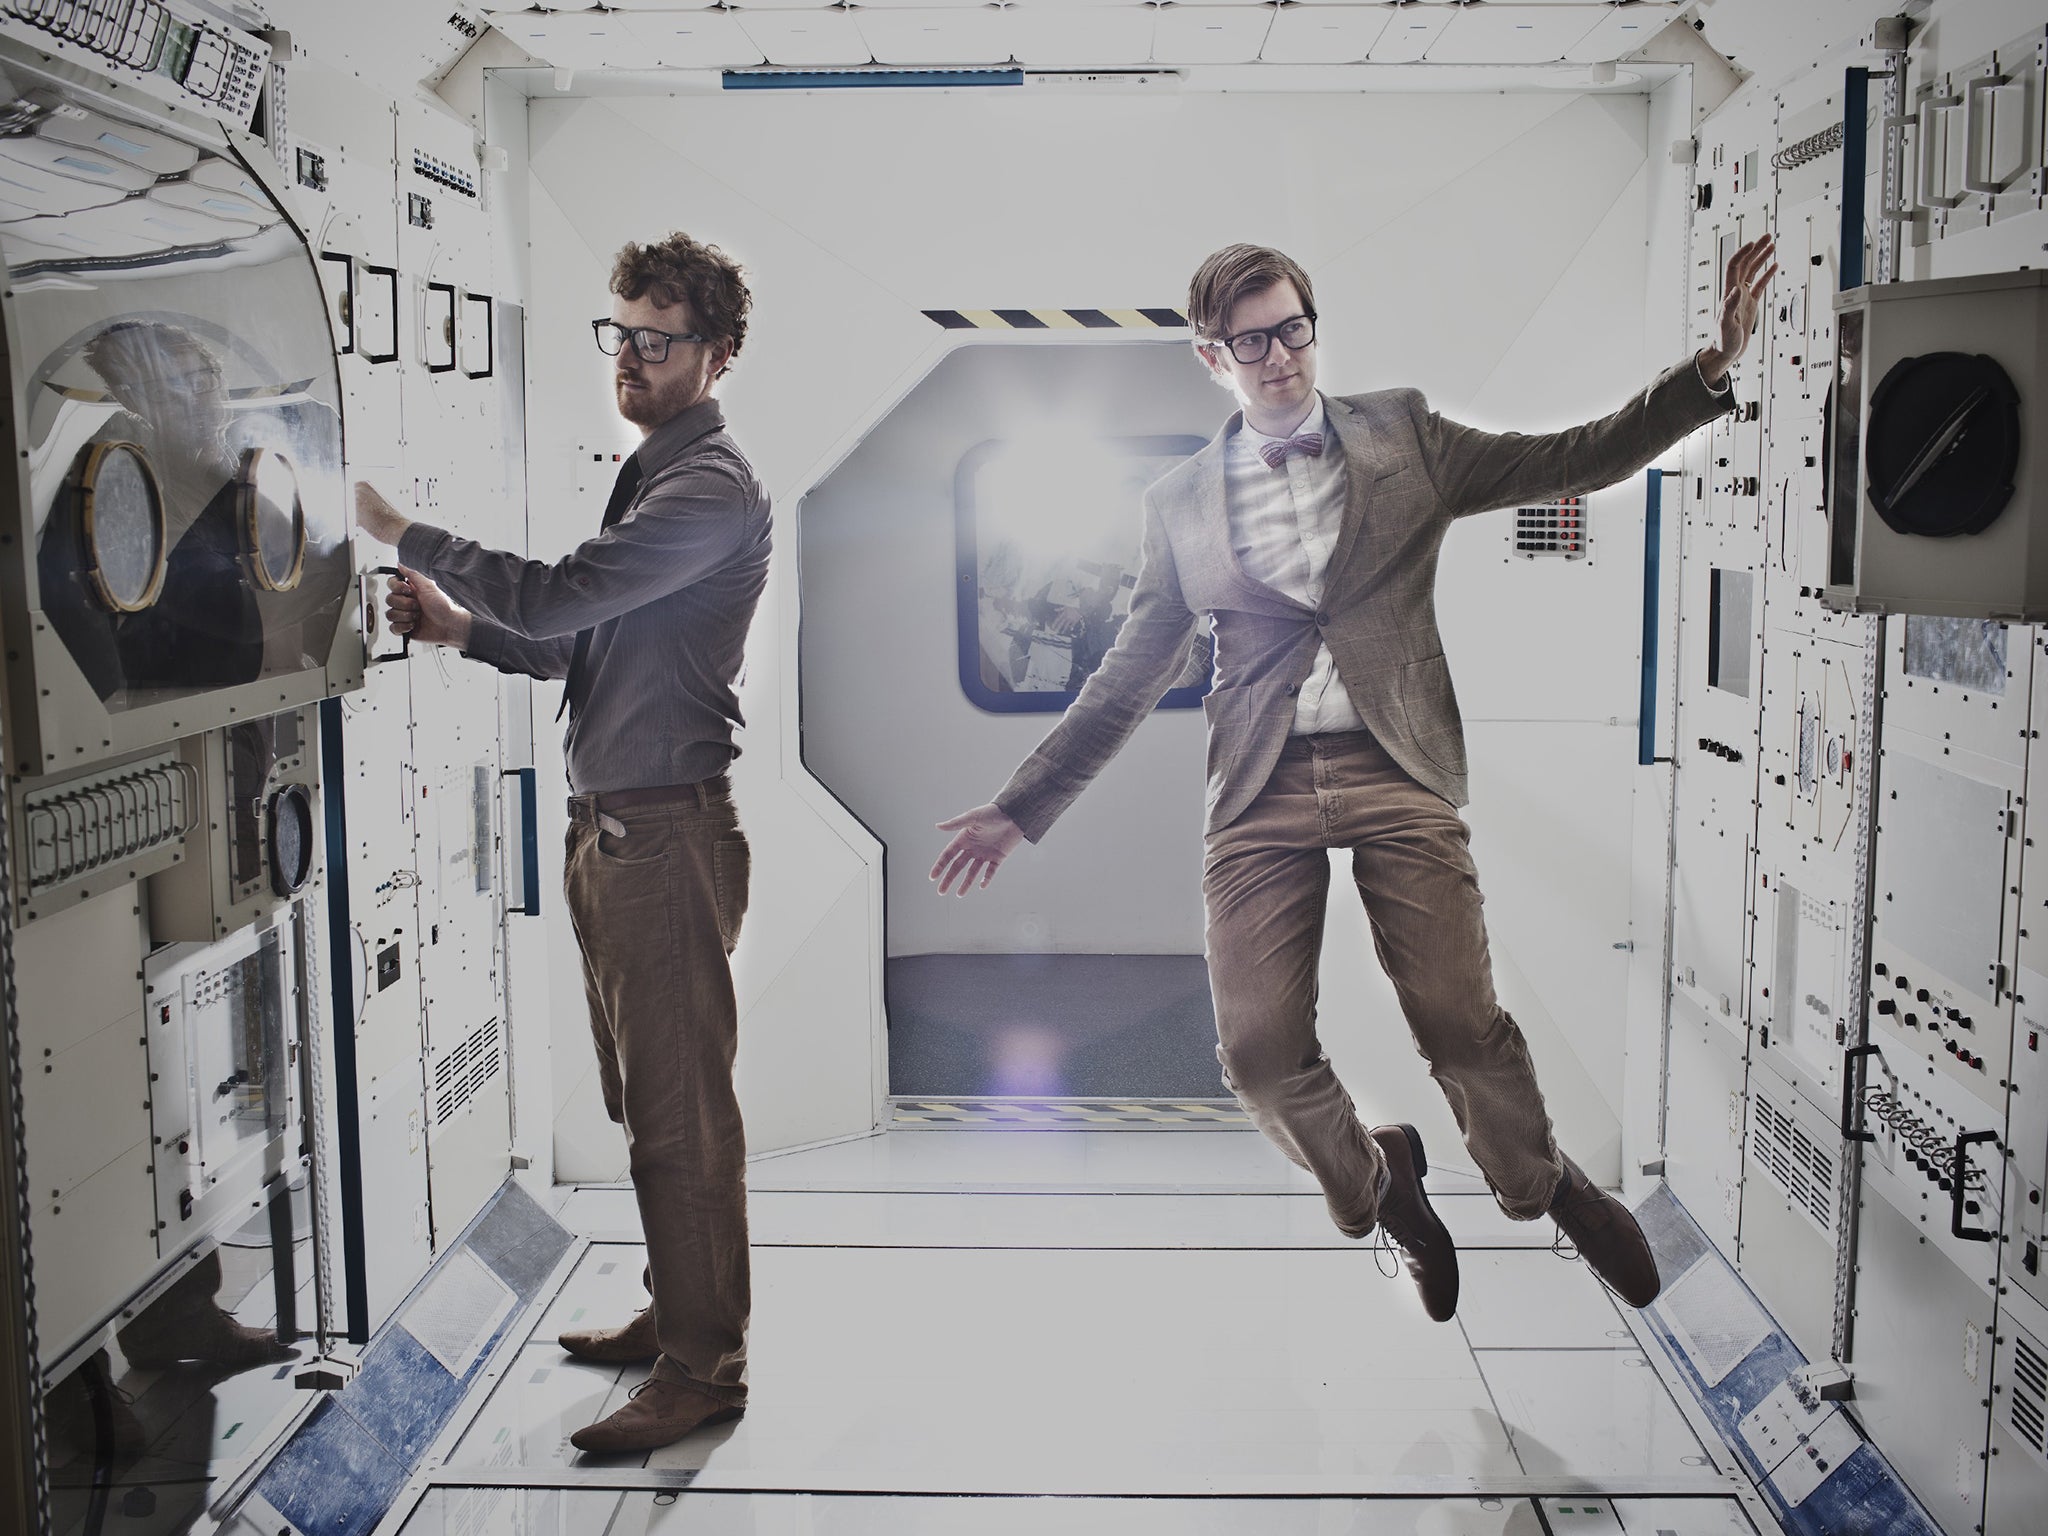 Public Service Broadcasting's new album The Race for Space is out now